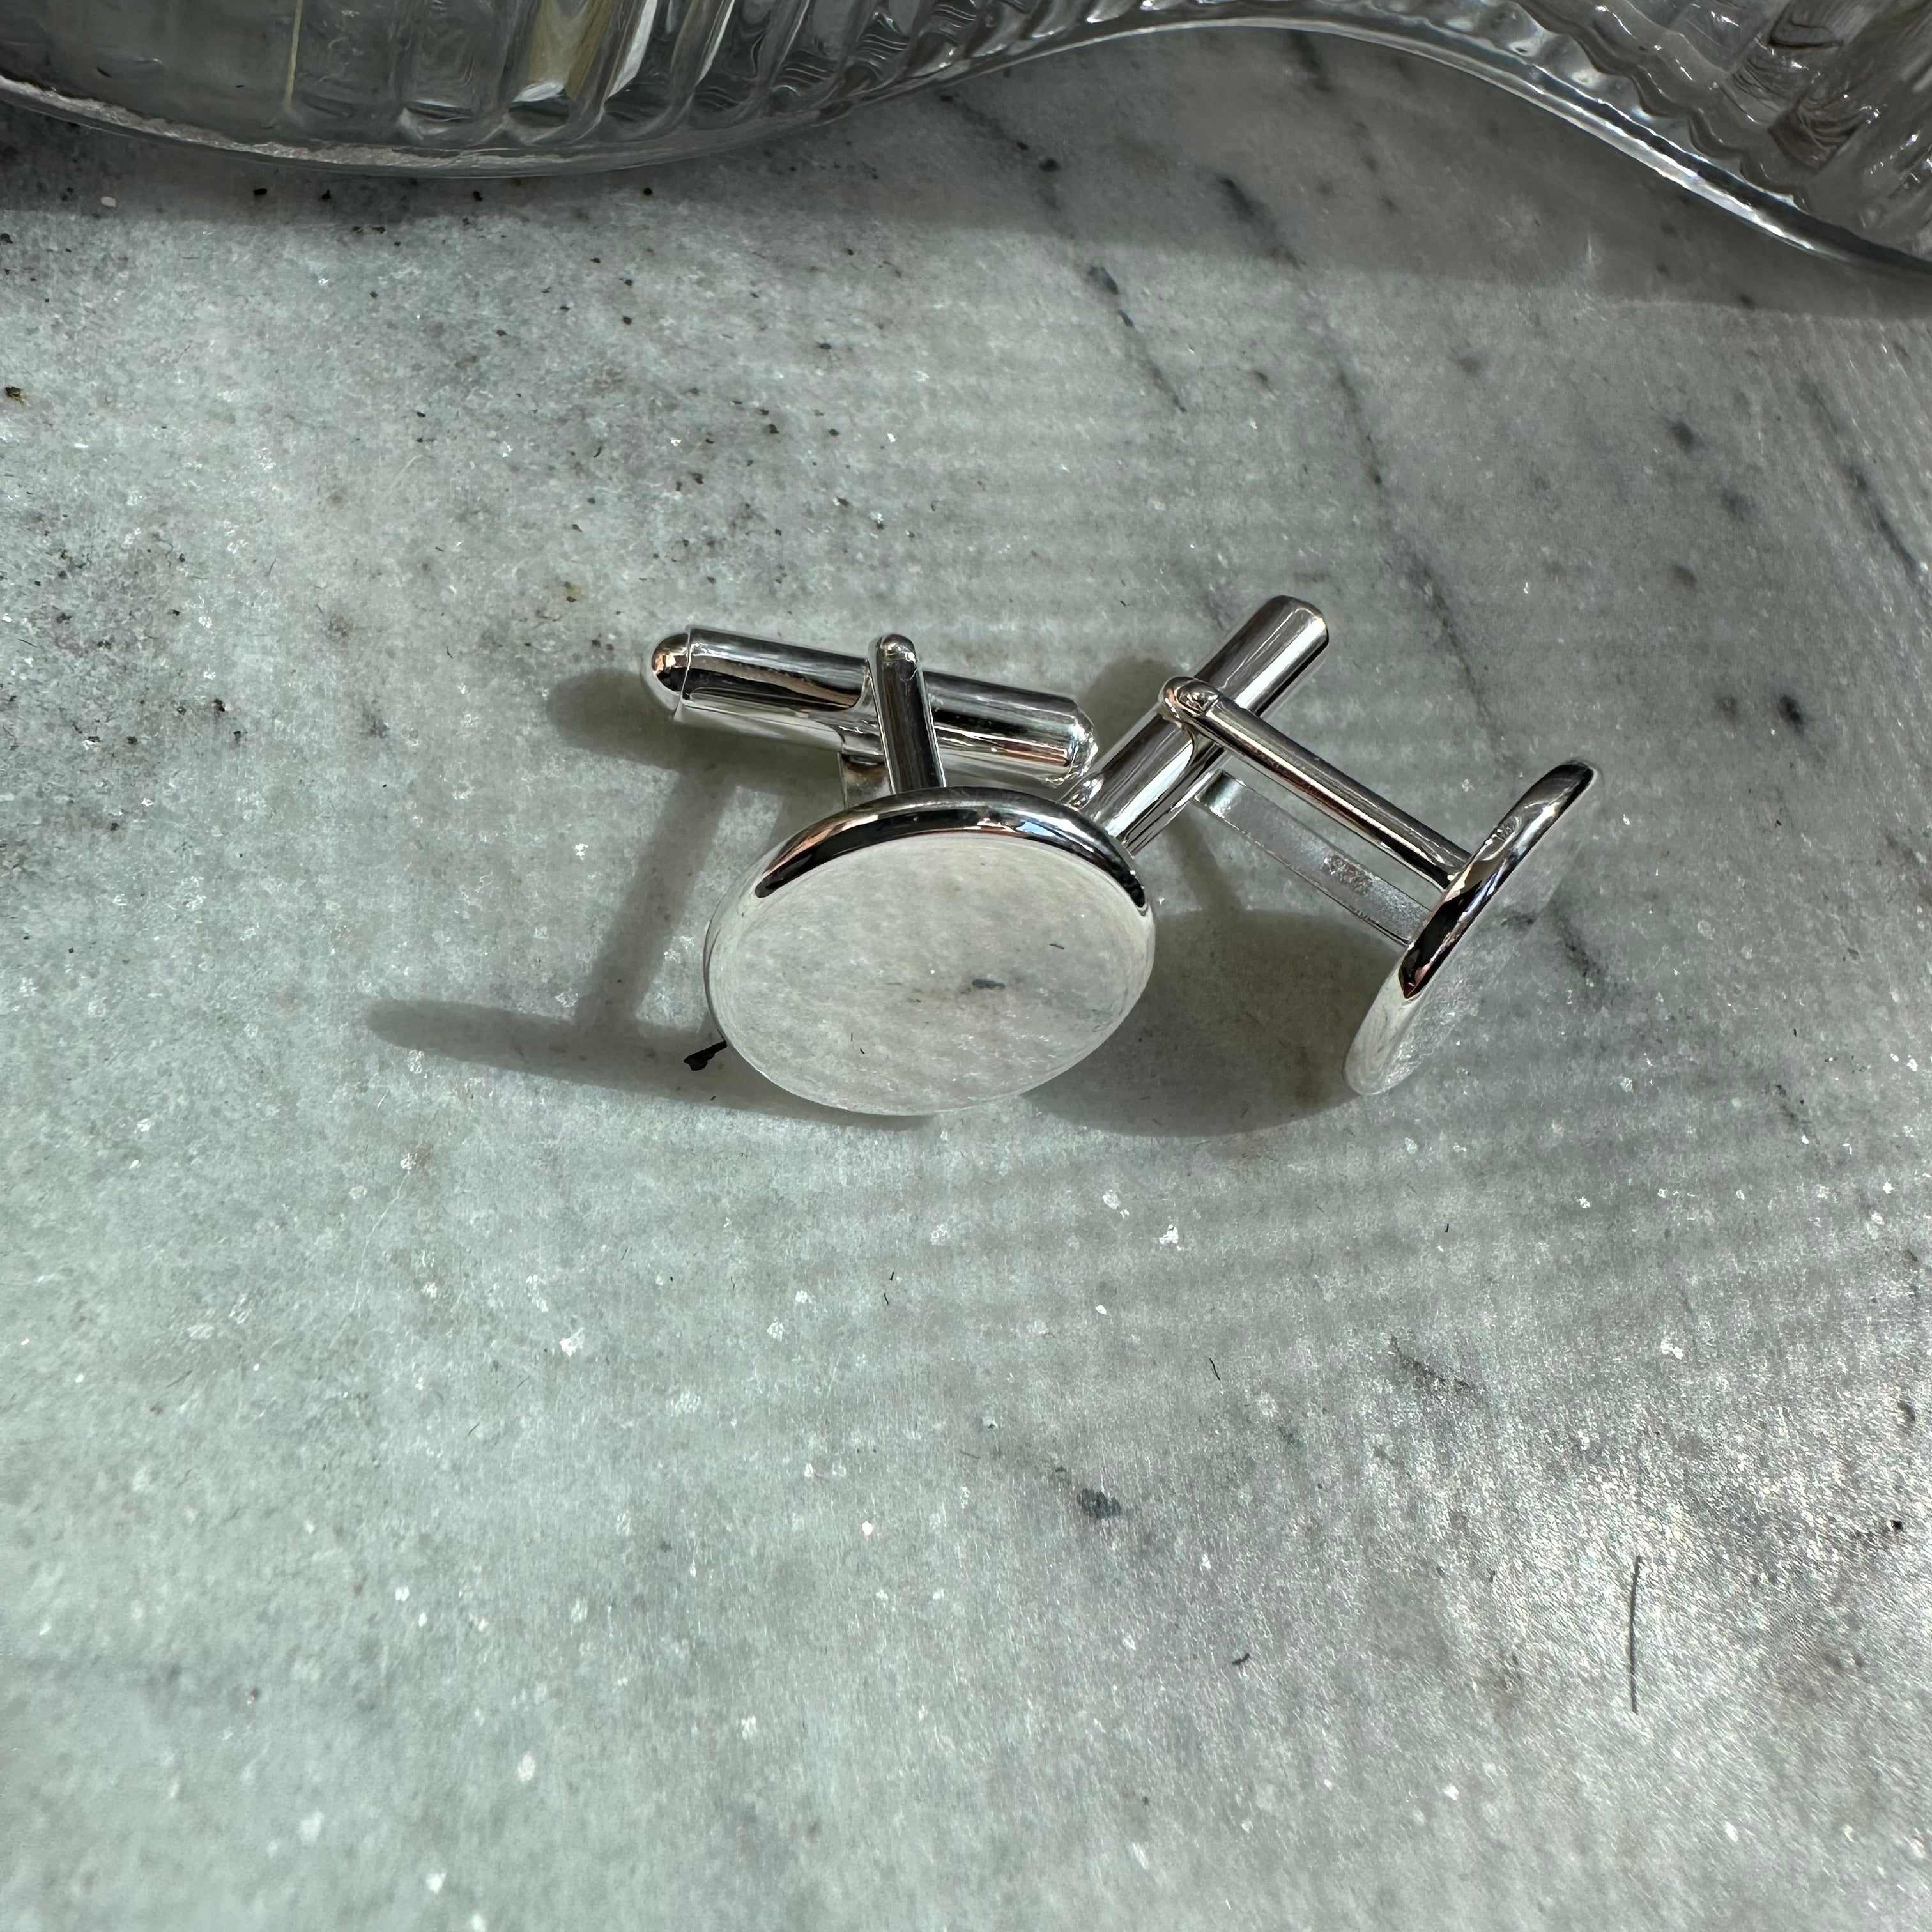 Sophisticated and elegant, our Sterling Silver Cufflinks from the Danibydsgn collection are the epitome of style for the modern gentleman. Ideal for personalizing with a Danibydsgn custom logo or monogrammed, they add a distinctive touch to any ensemble. These cufflinks serve not just as men's jewelry but as a timeless gift for him, reflecting thoughtfulness and elegance. With the option to engrave, these coin cufflinks become a keepsake, encapsulating memories or messages in a subtle yet impactful way.